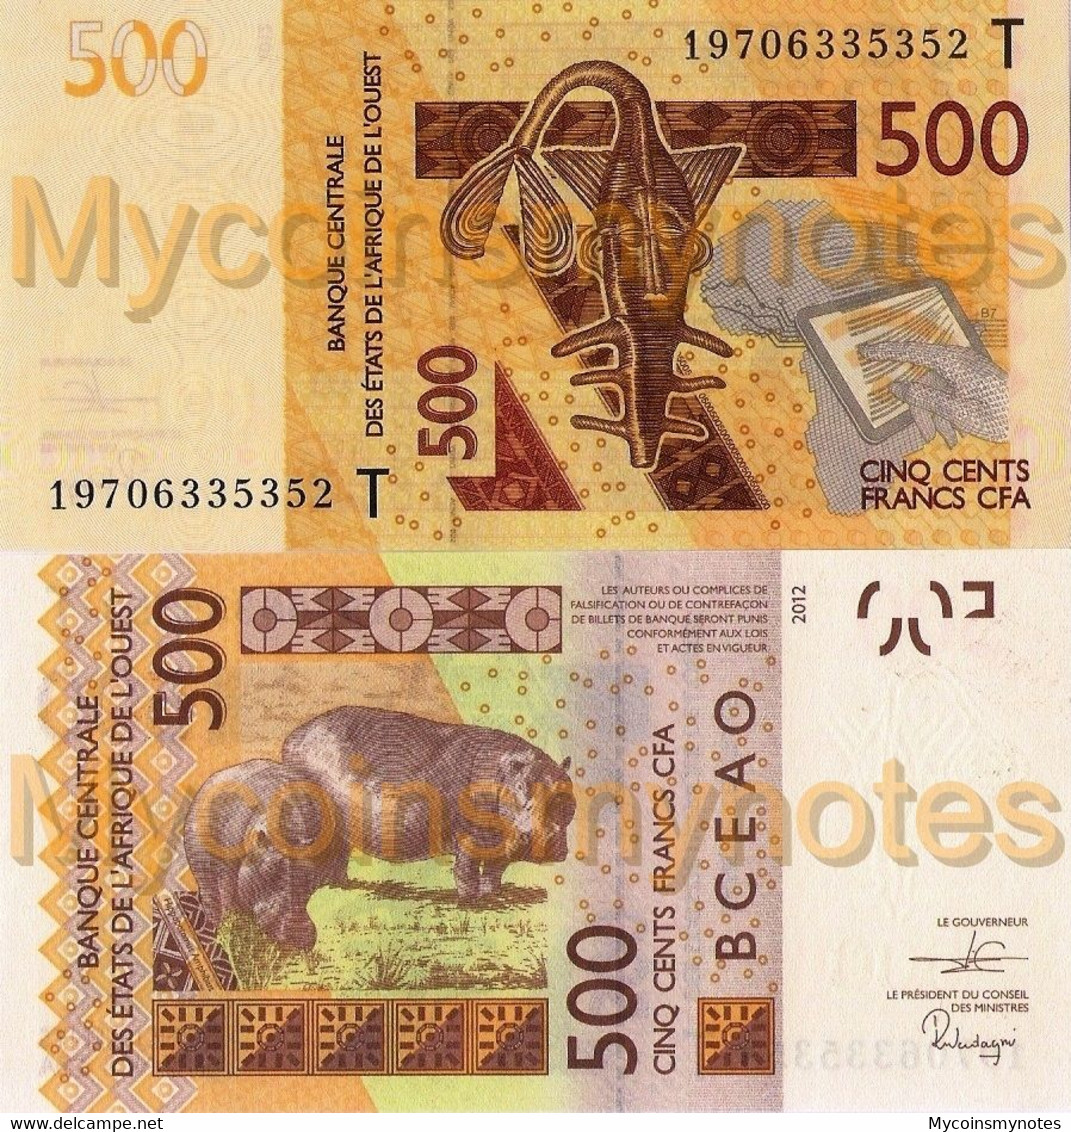 WEST AFRICAN STATES, TOGO, 500 F, 2019, Code T, PNew, Not In Catalog, UNC - West African States